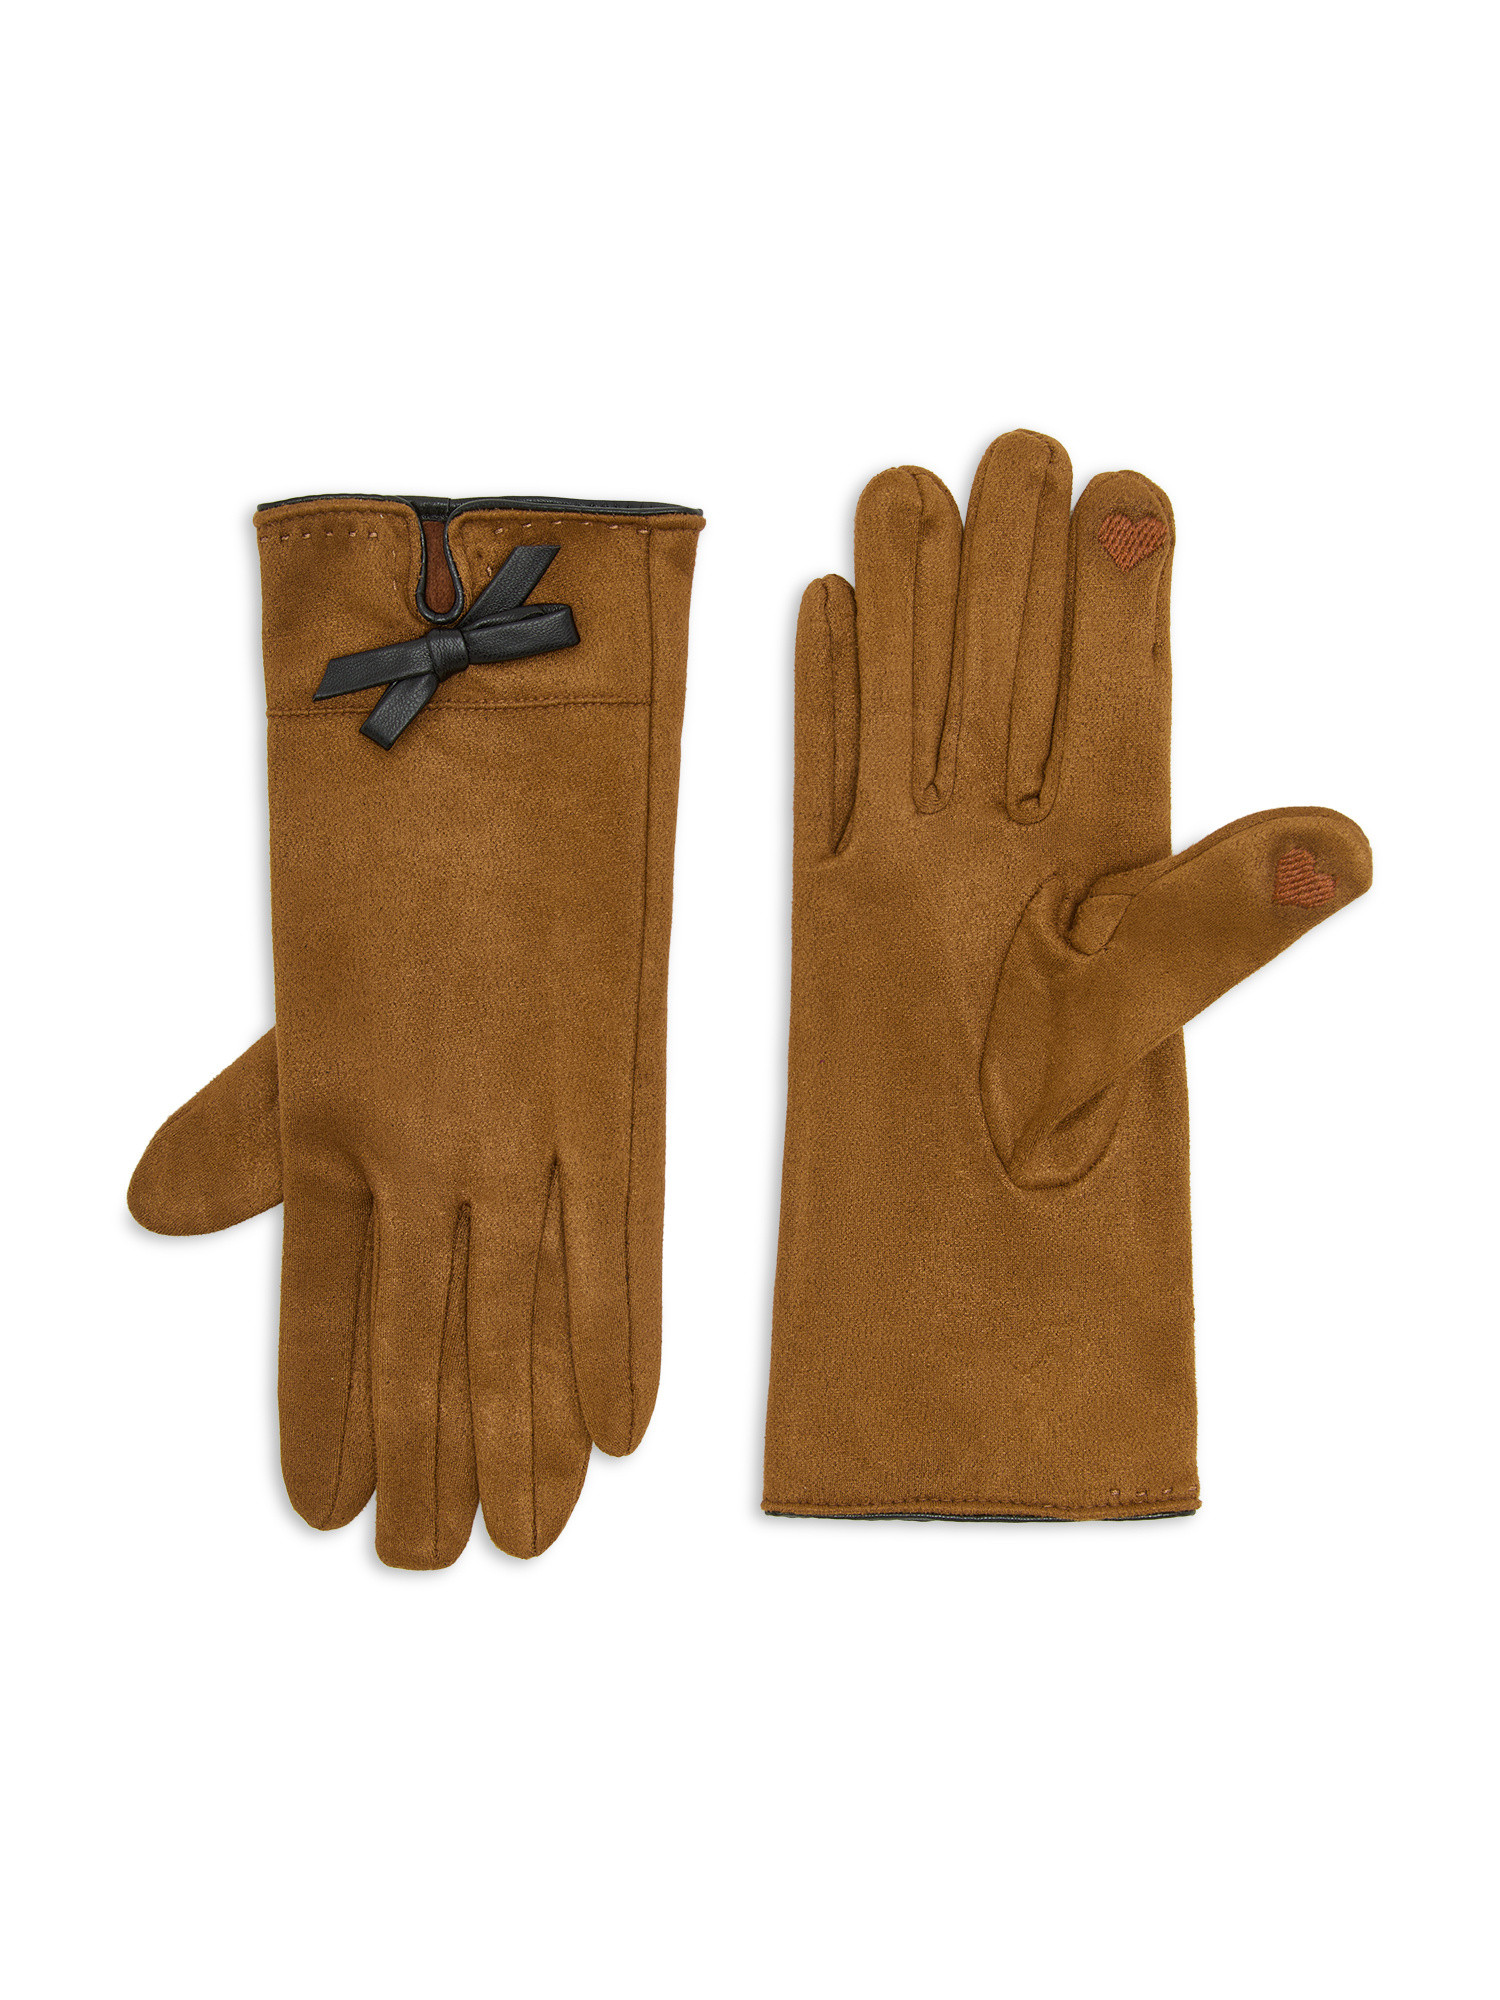 Koan - Gloves with bow, Camel, large image number 0